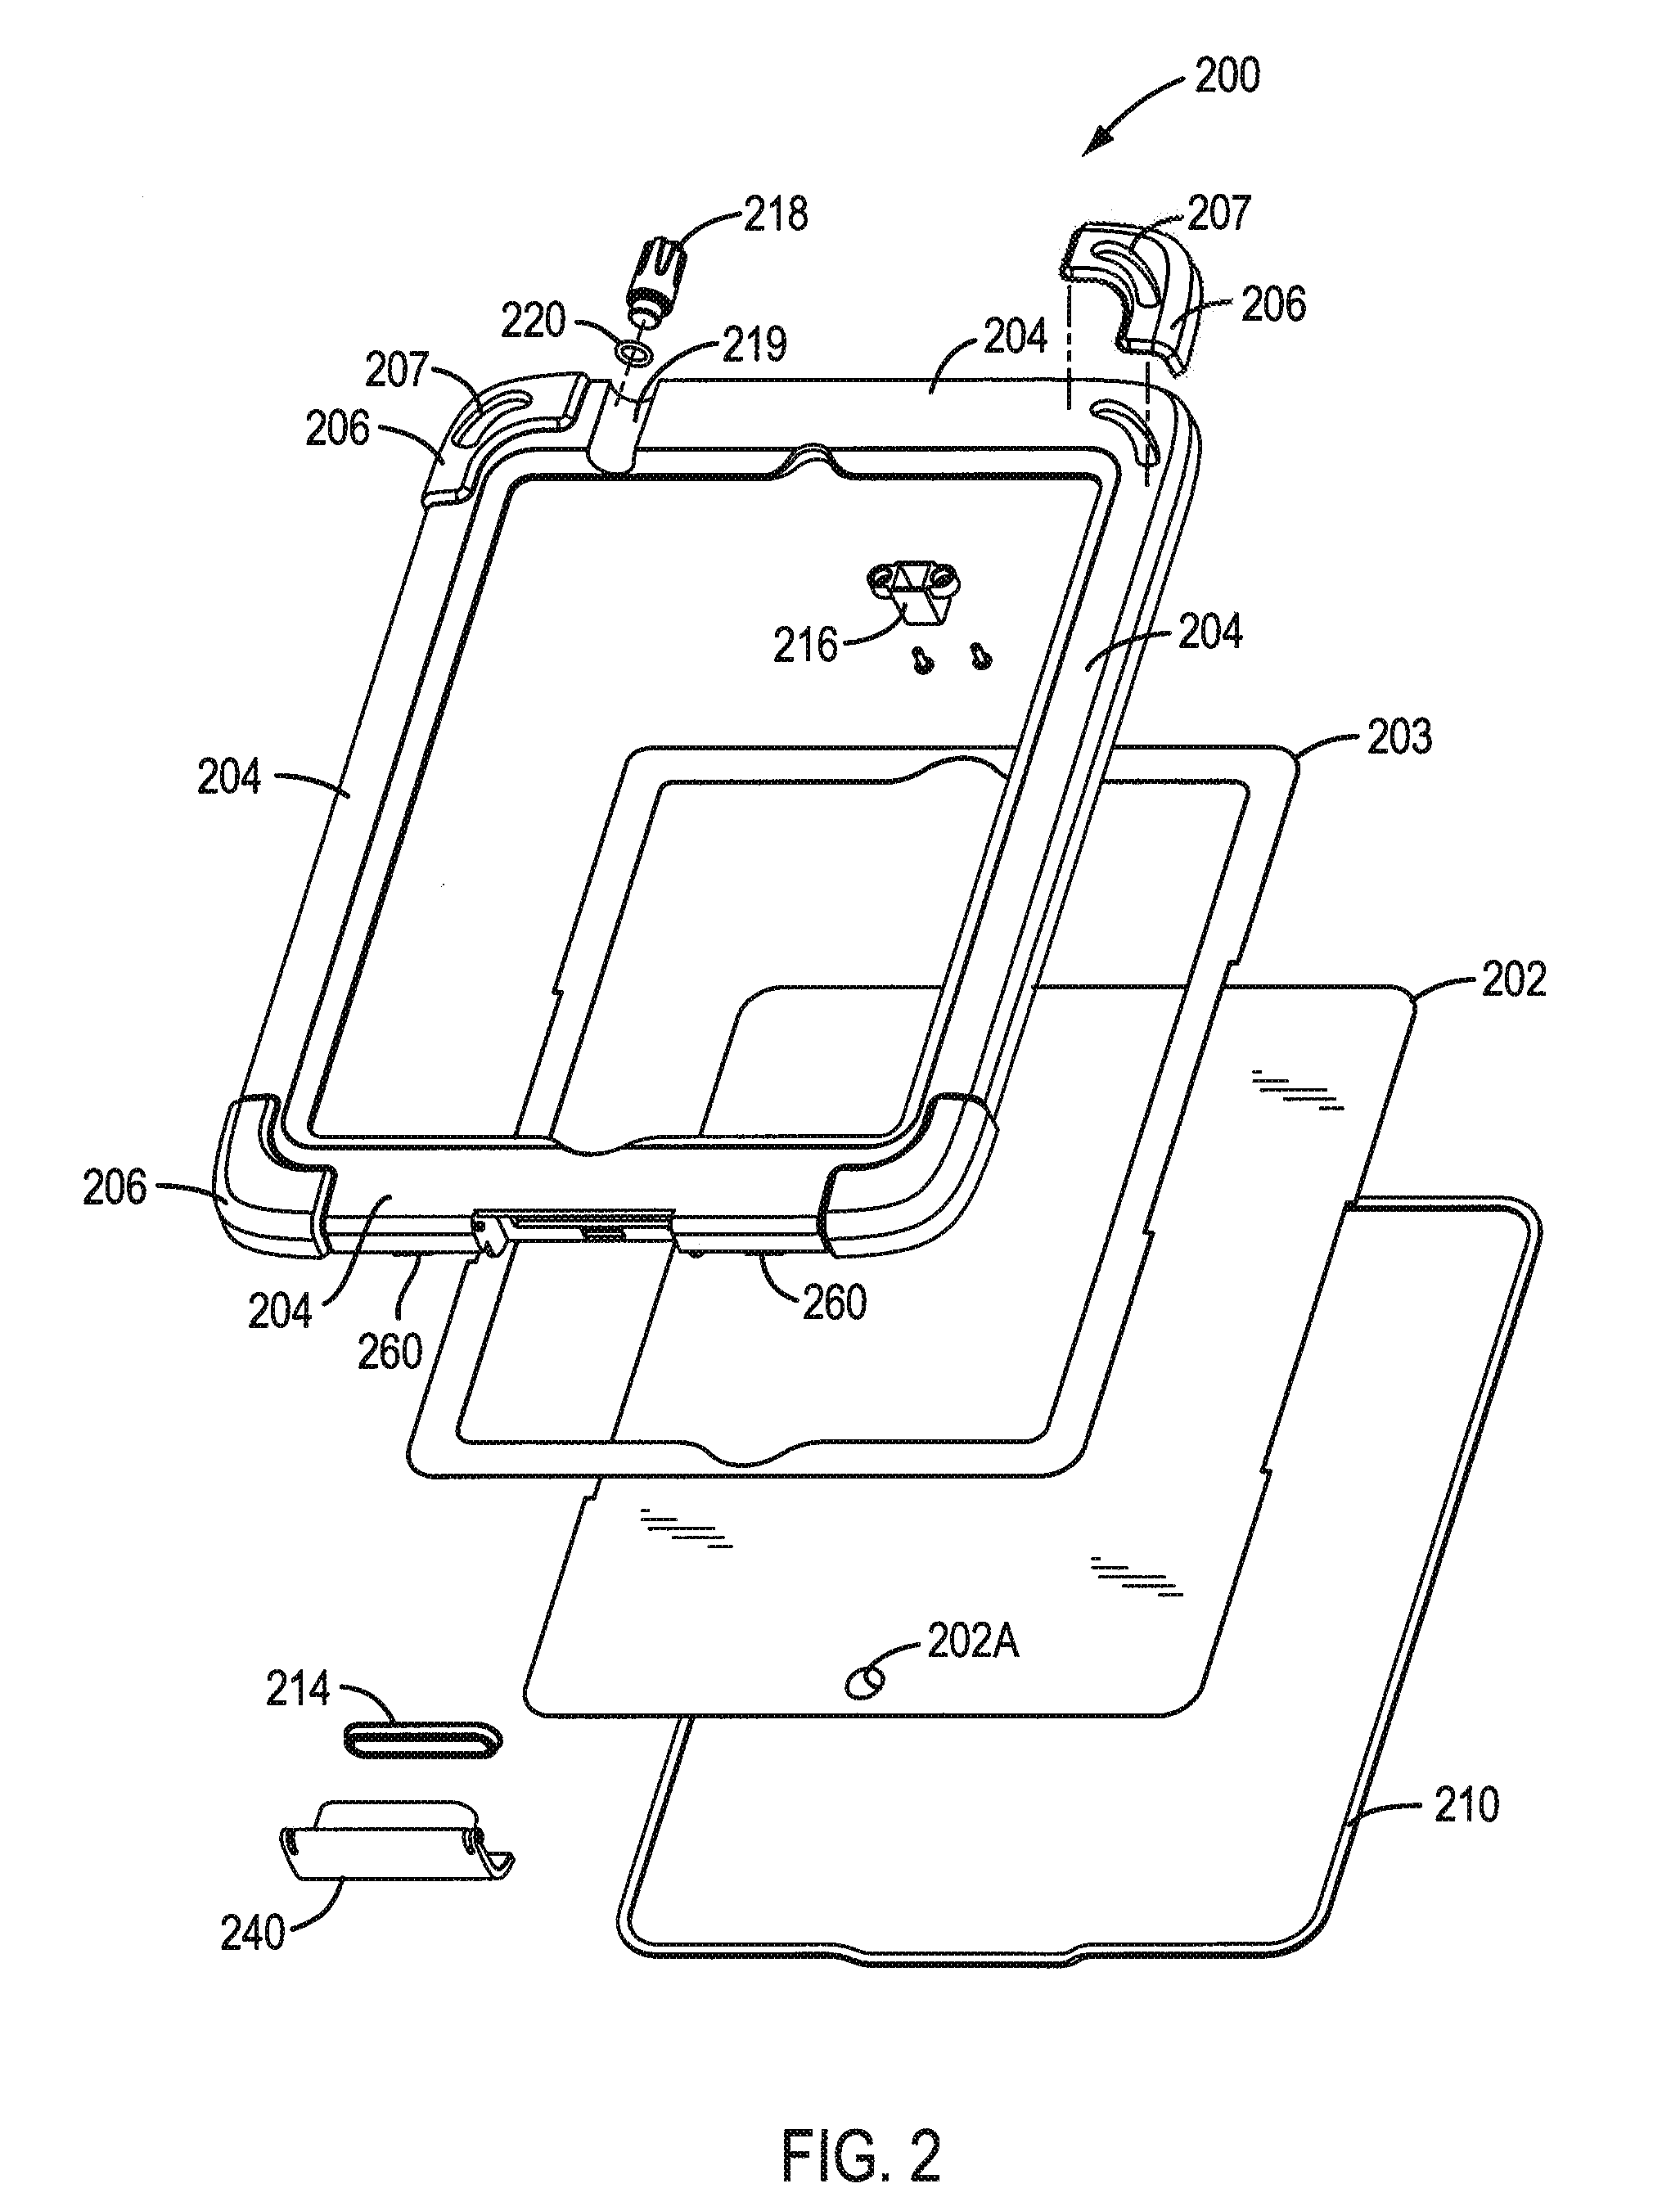 Protective casing providing impact absorption and water resistance for portable electronic devices